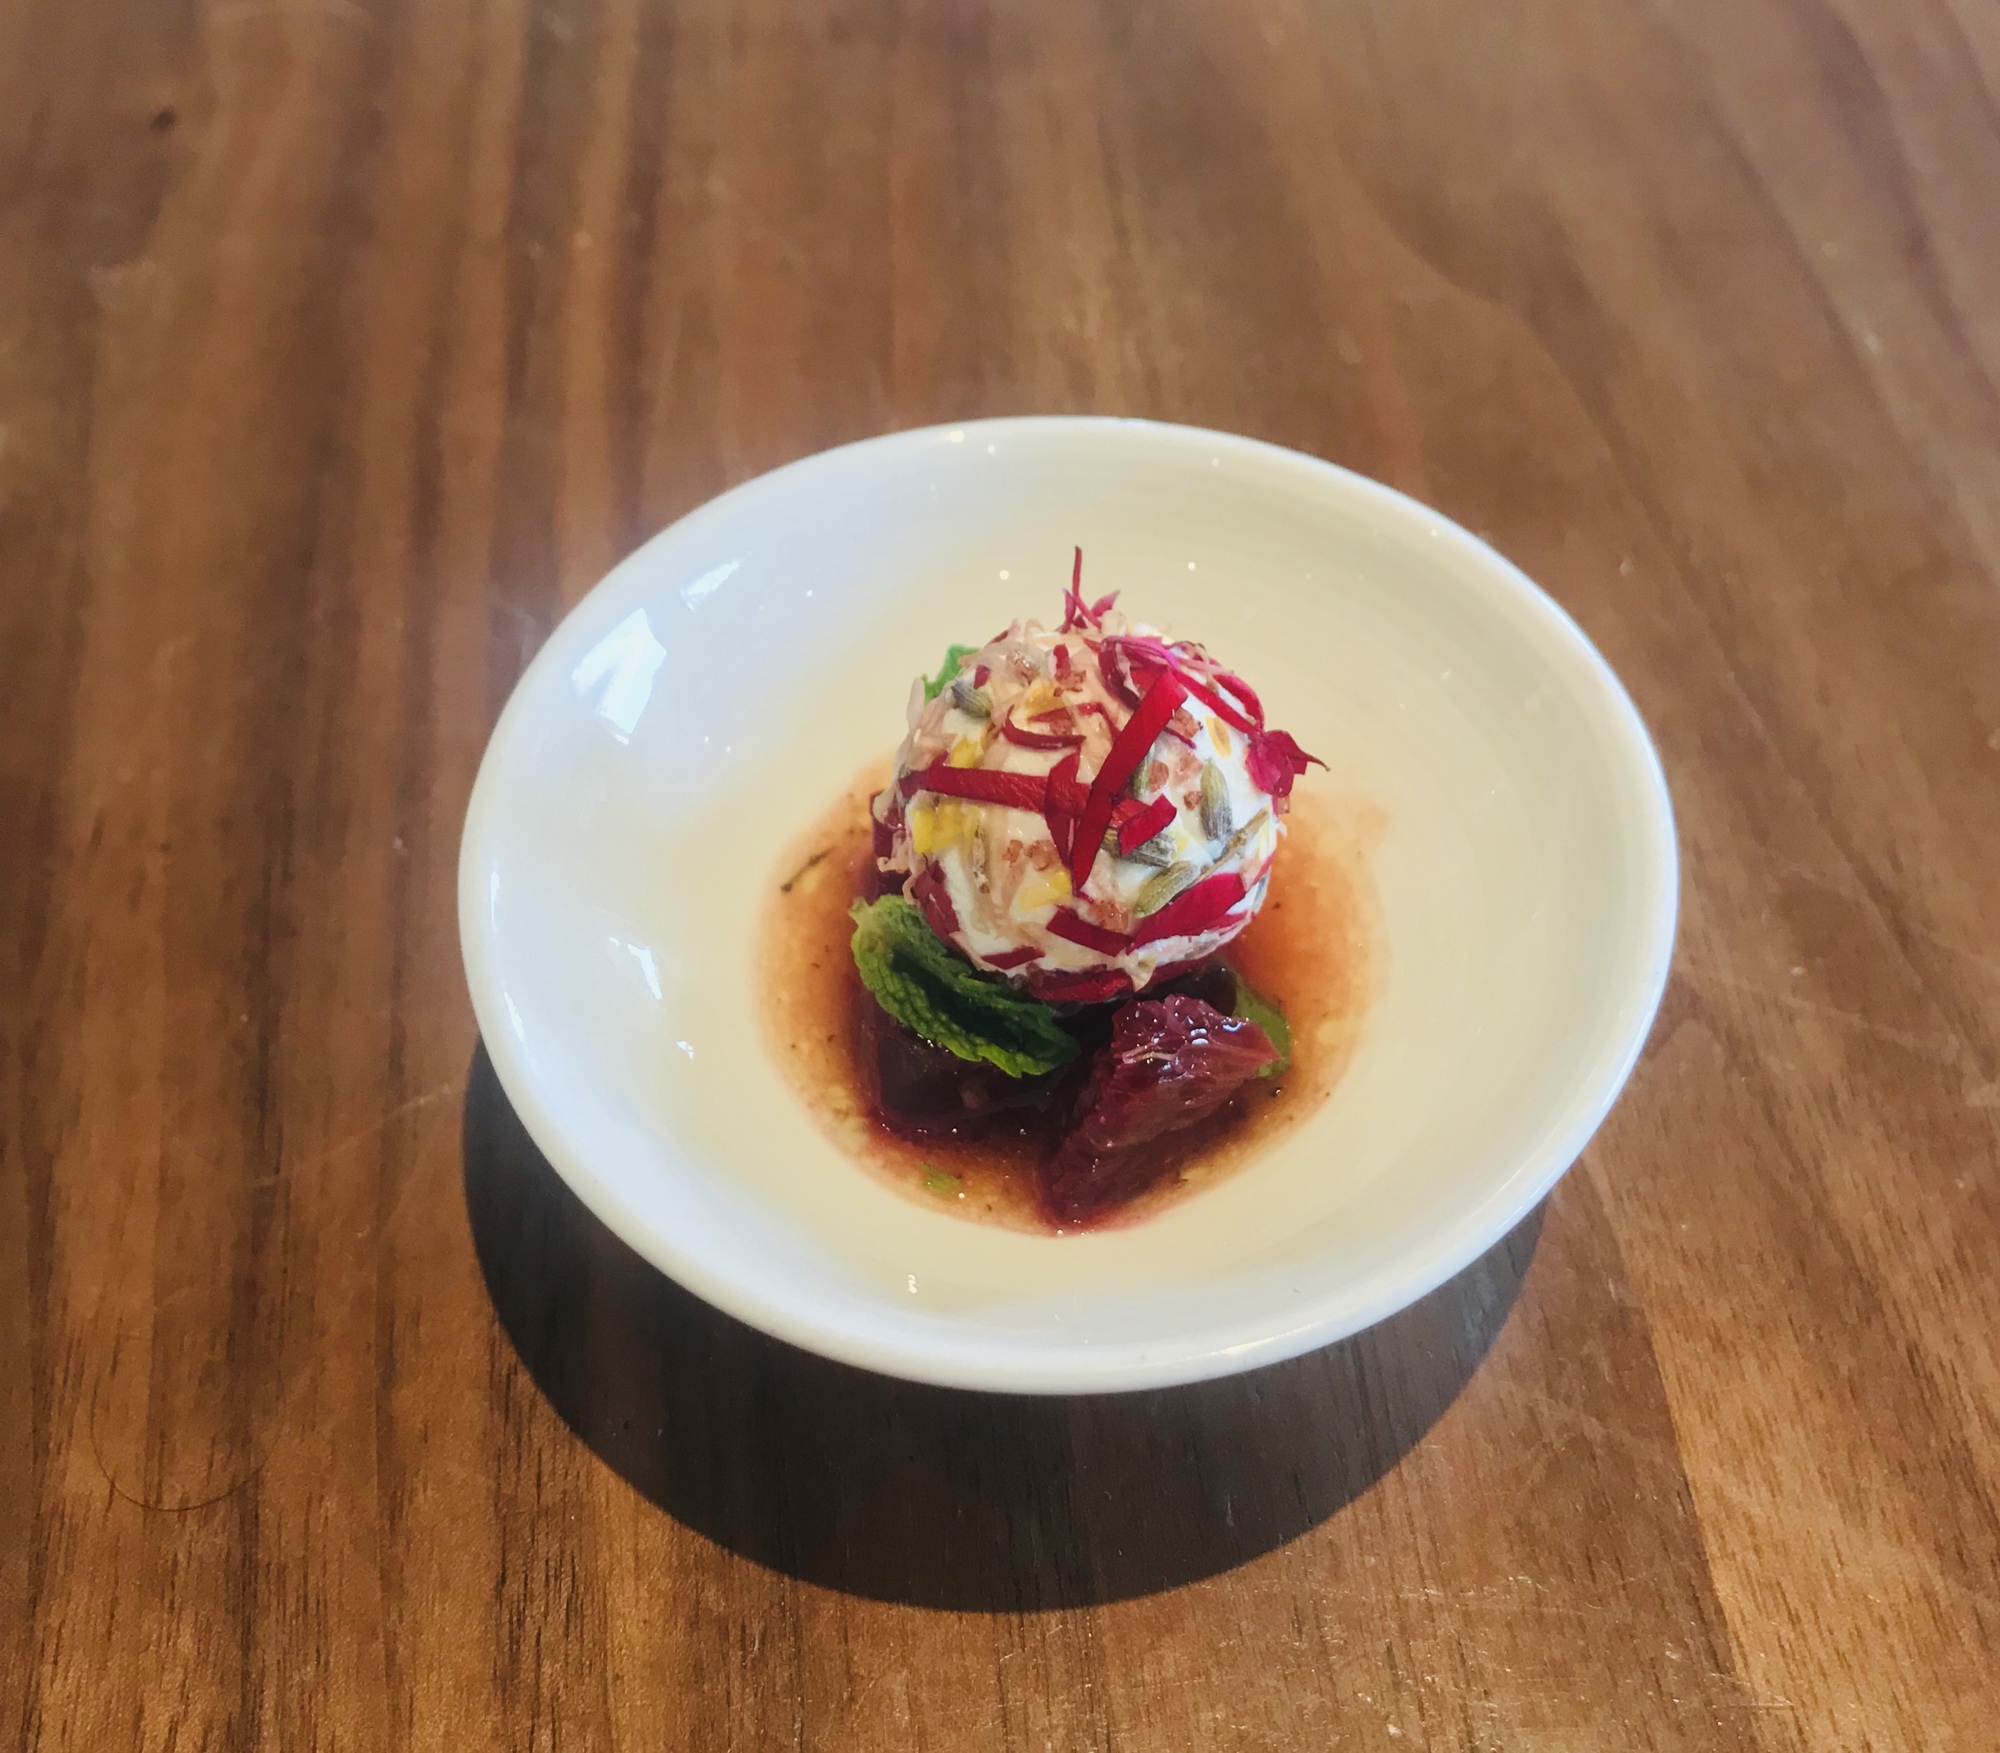 Each table will receive an amuse bouche from the chef, which is a lavender sea salt and rose petal-crusted goat cheese appetizer.   Courtesy photo